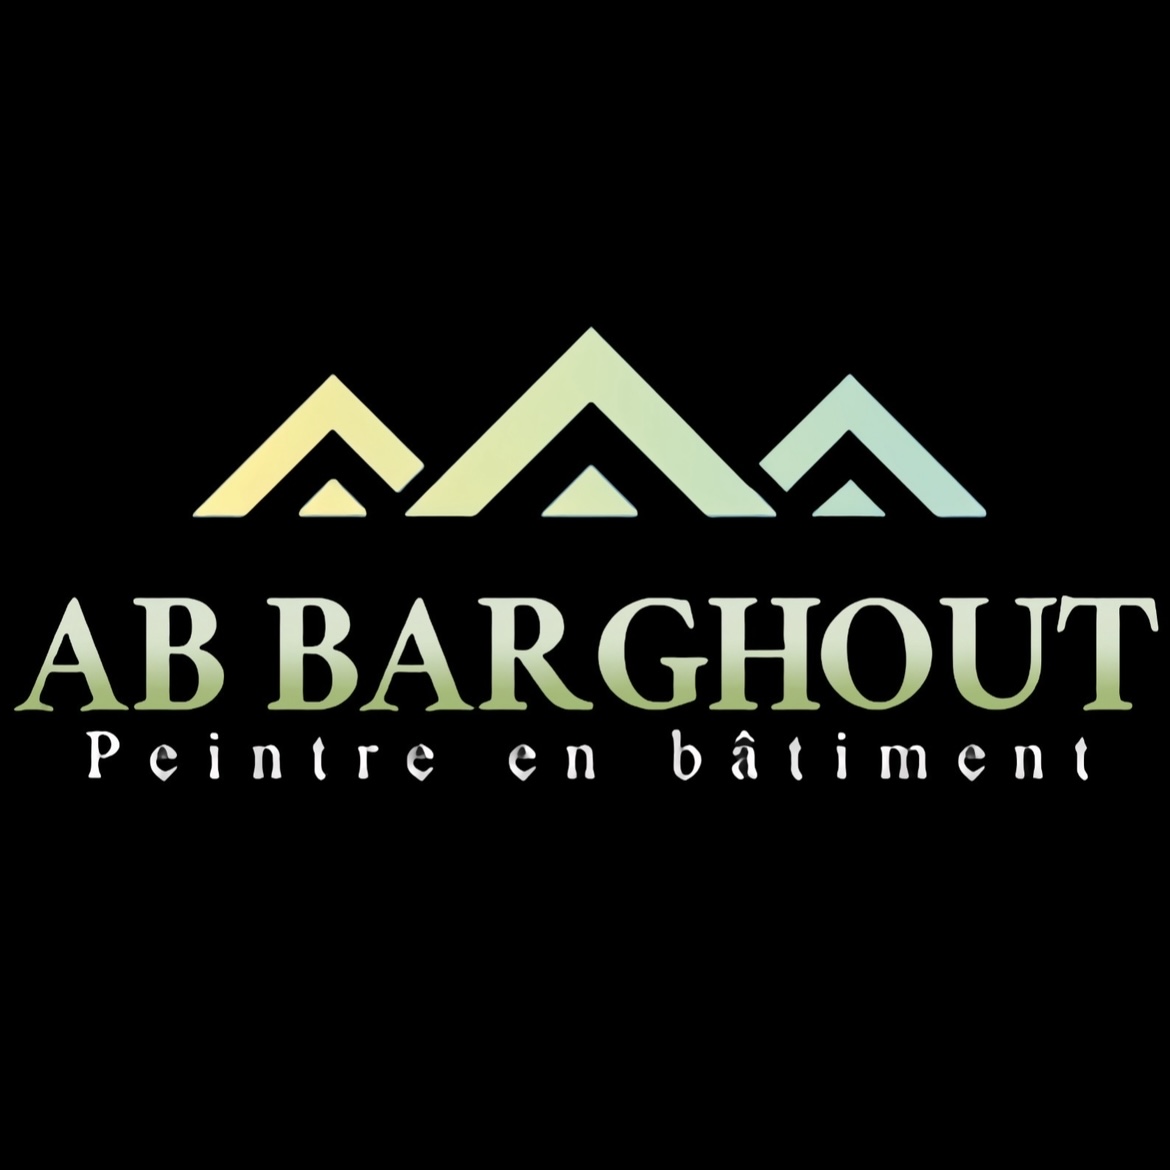 AB Barghout